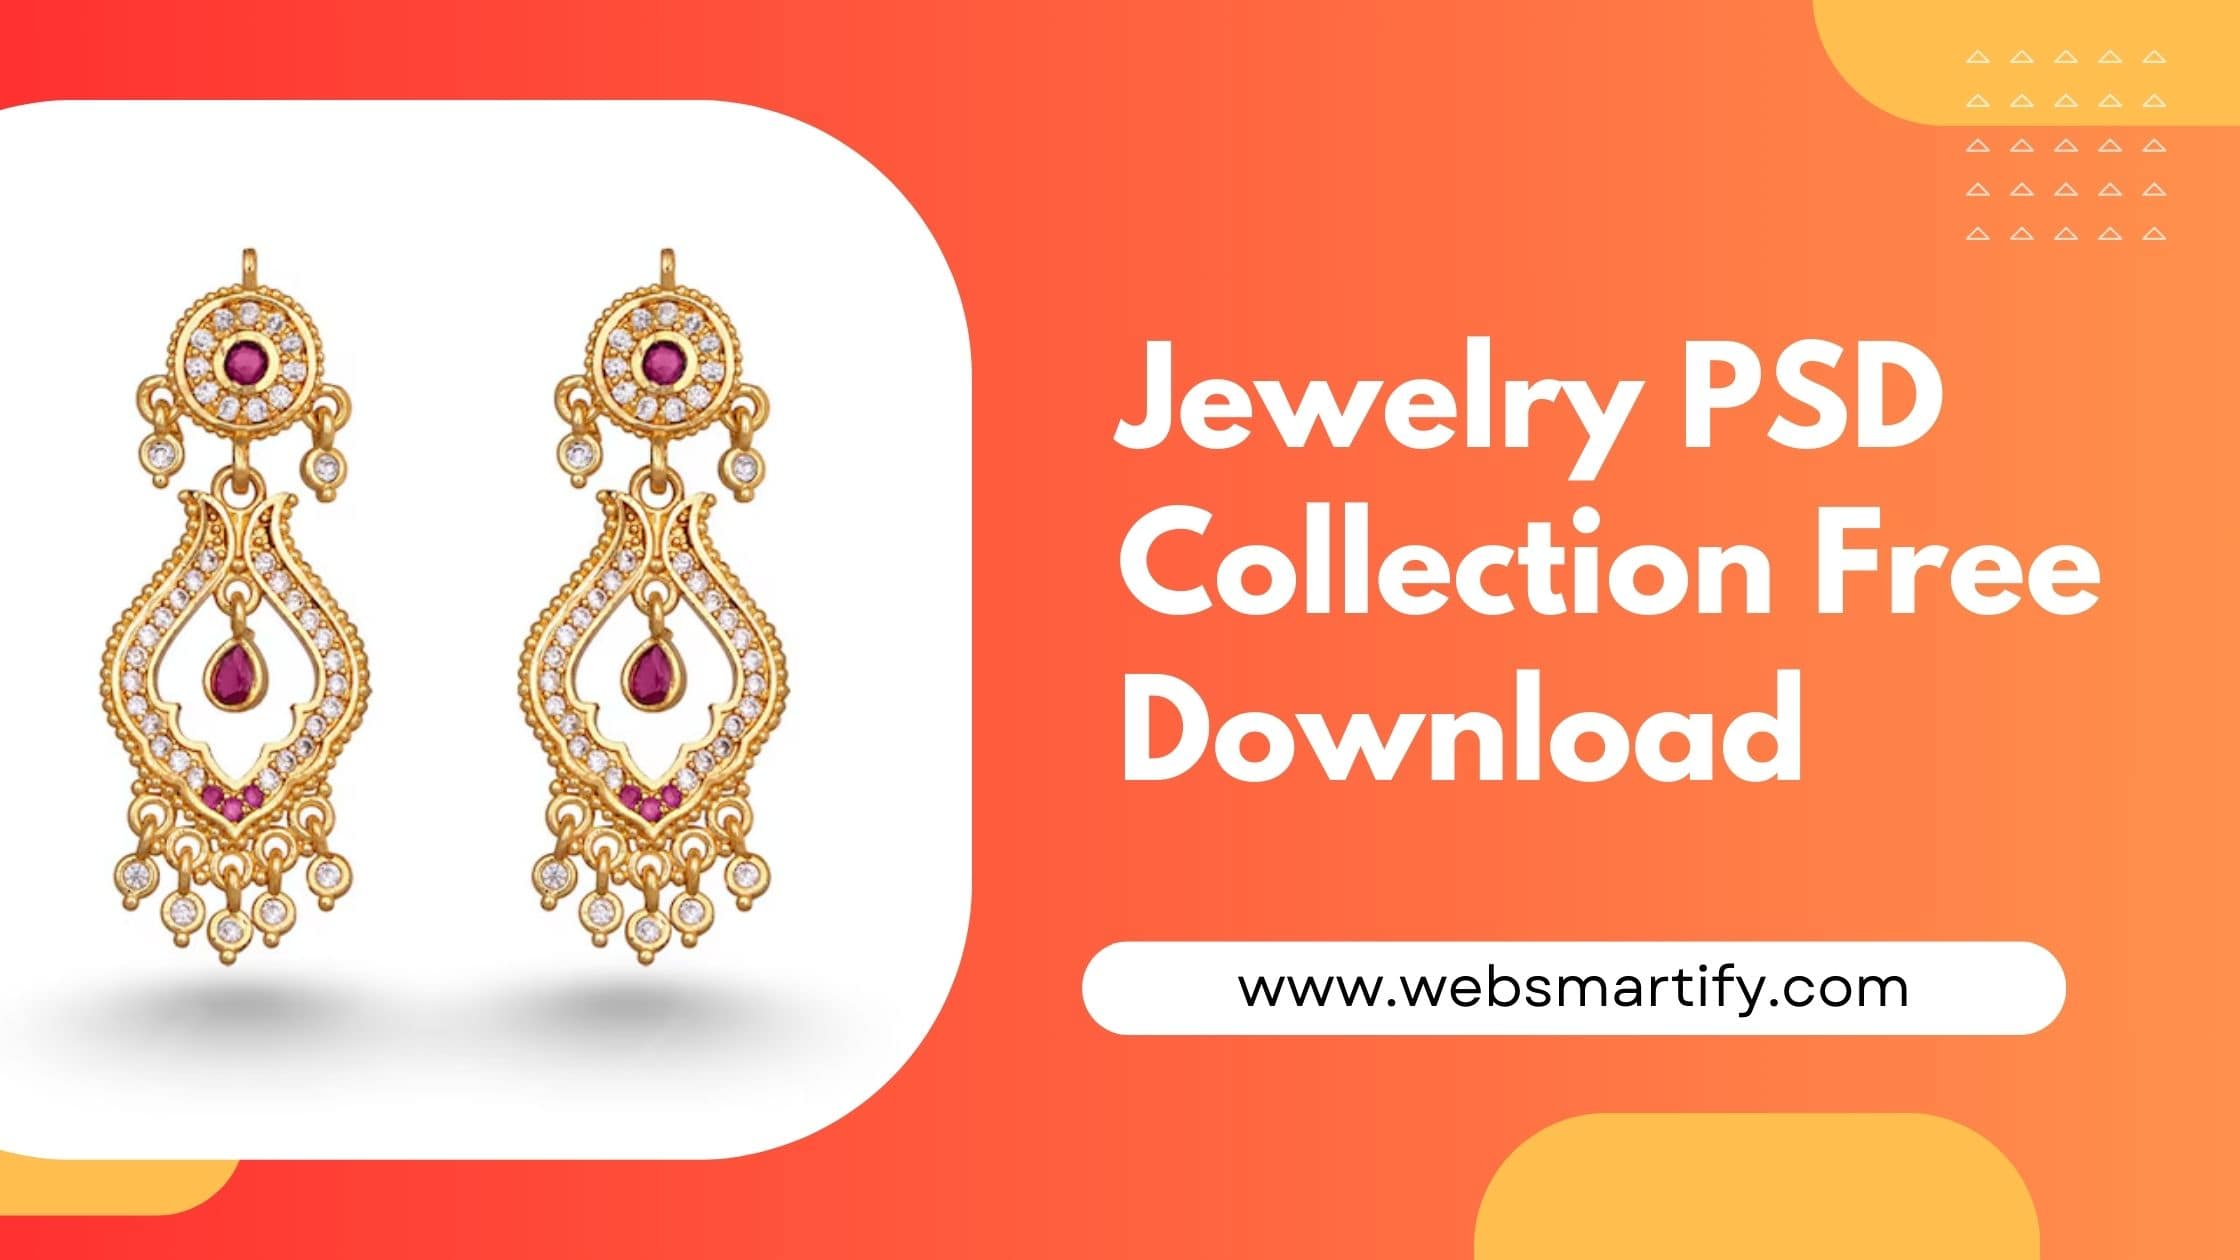 Jewelry PSD Collection - Websmartify